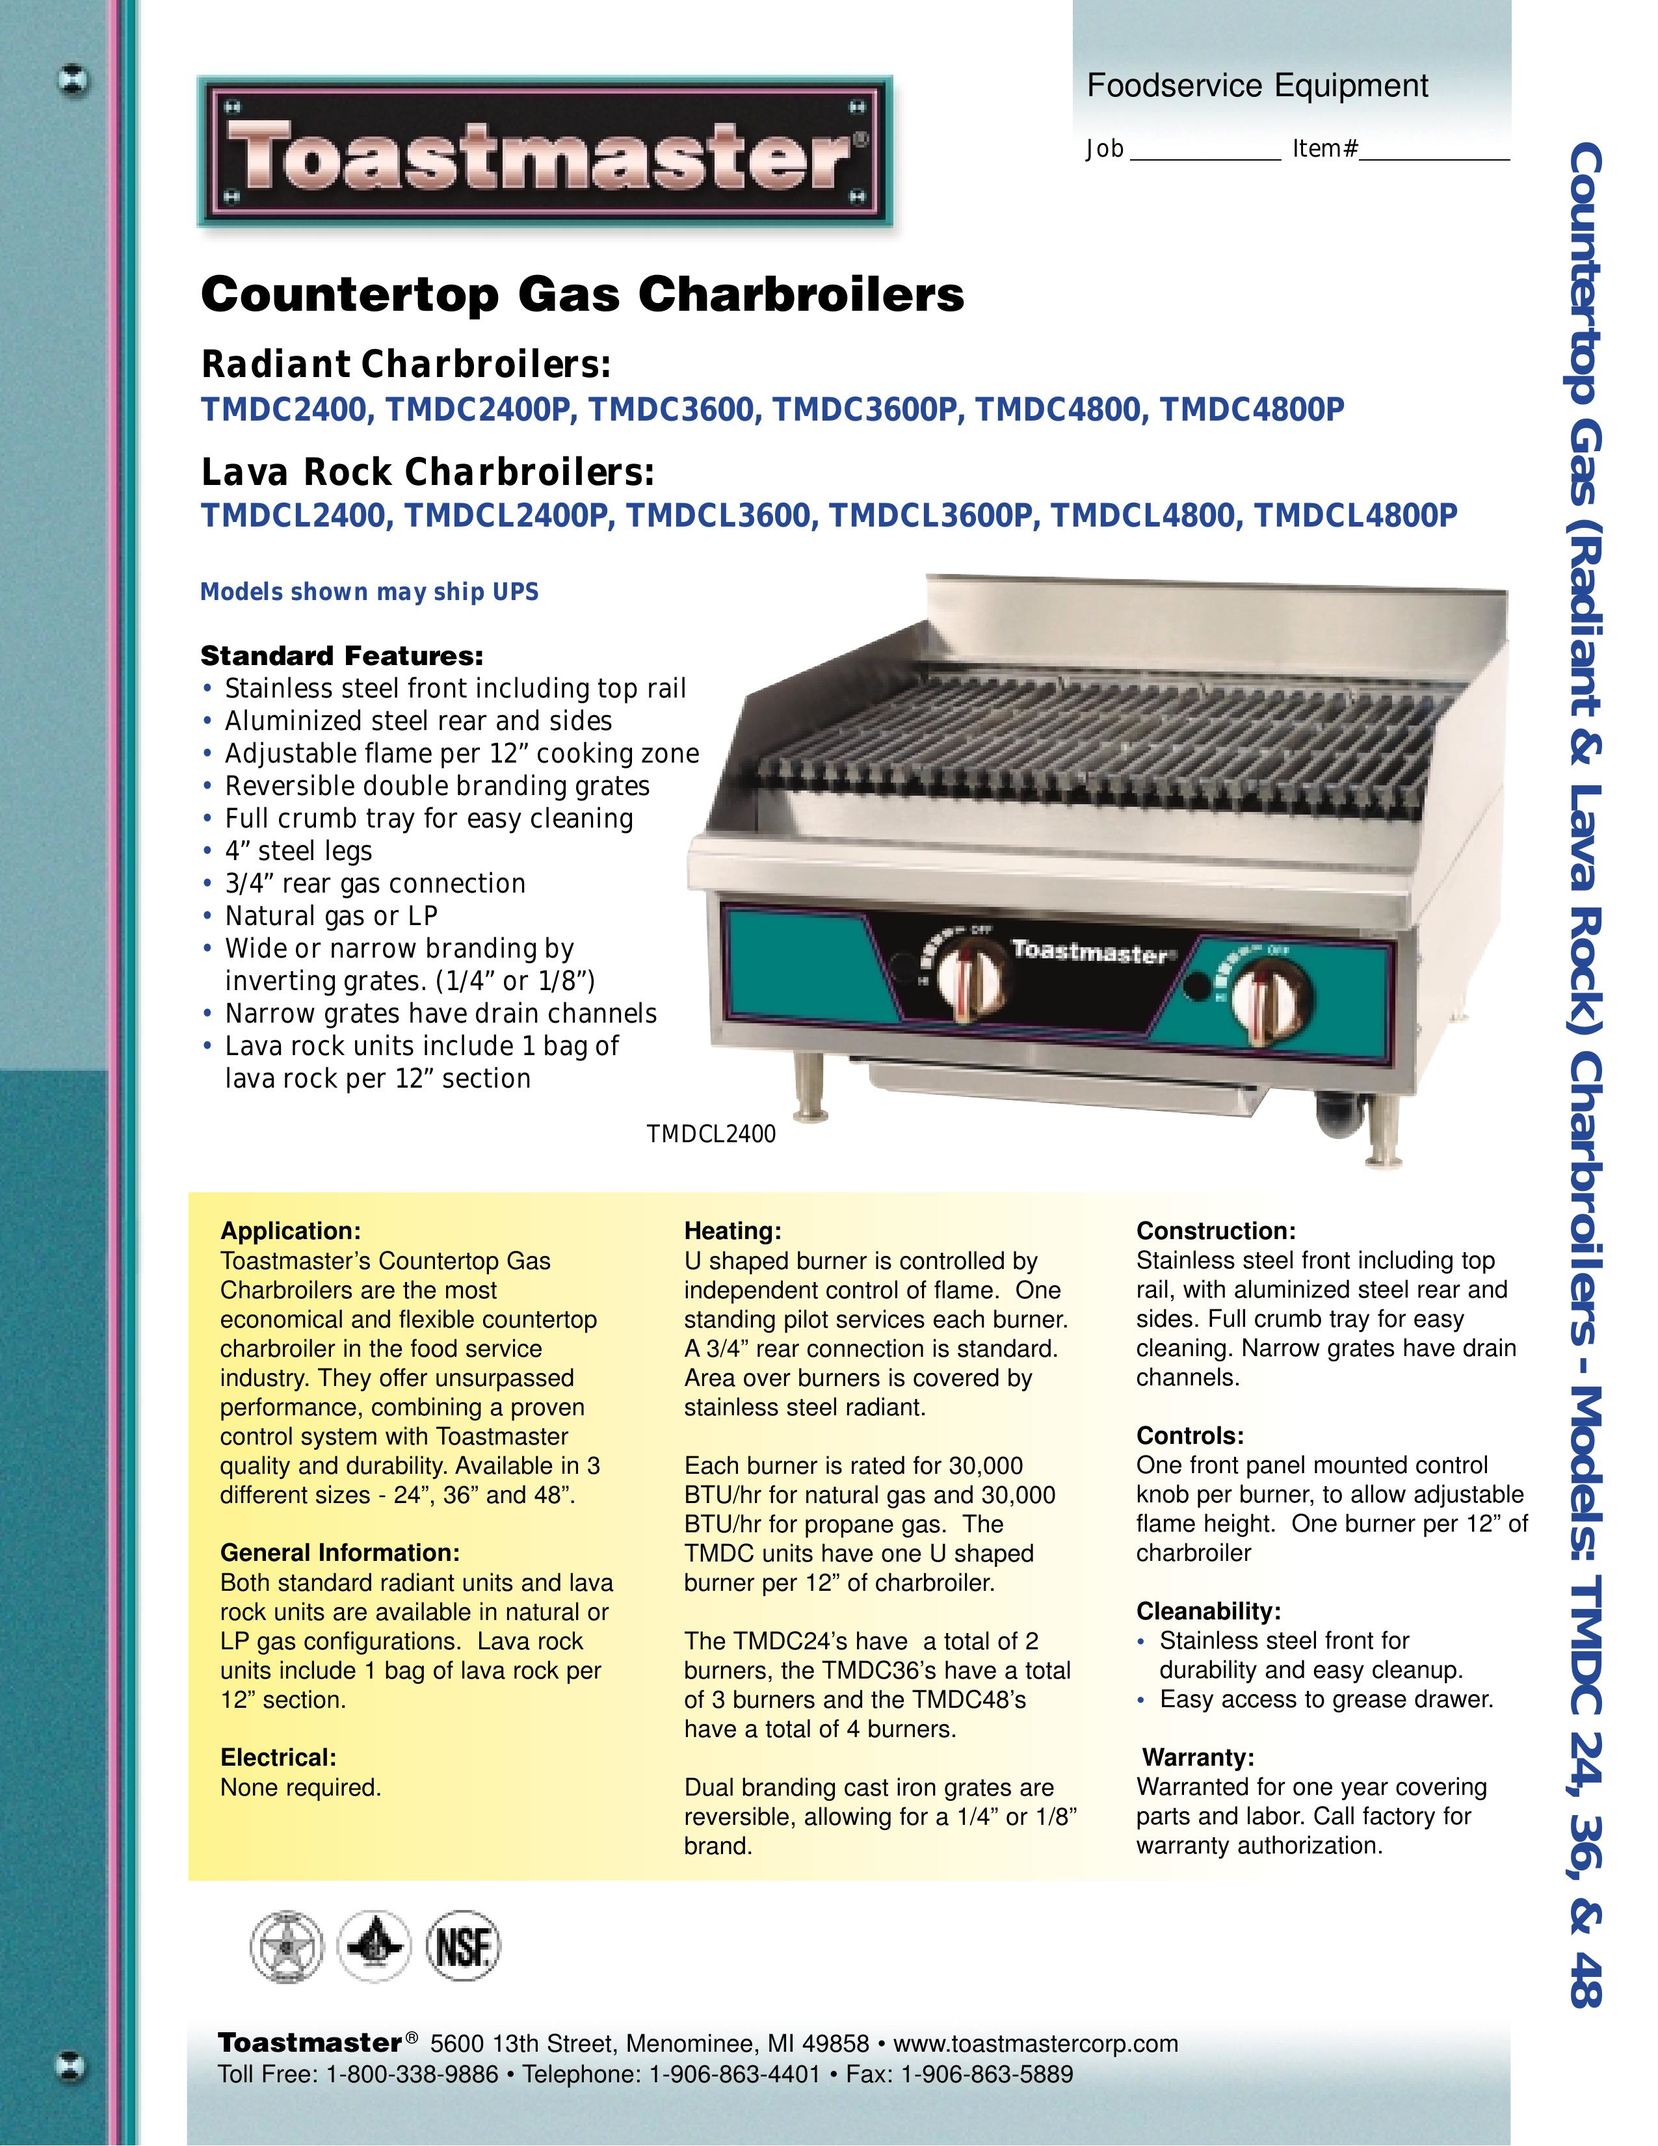 Toastmaster TMDCL3600 Oven User Manual